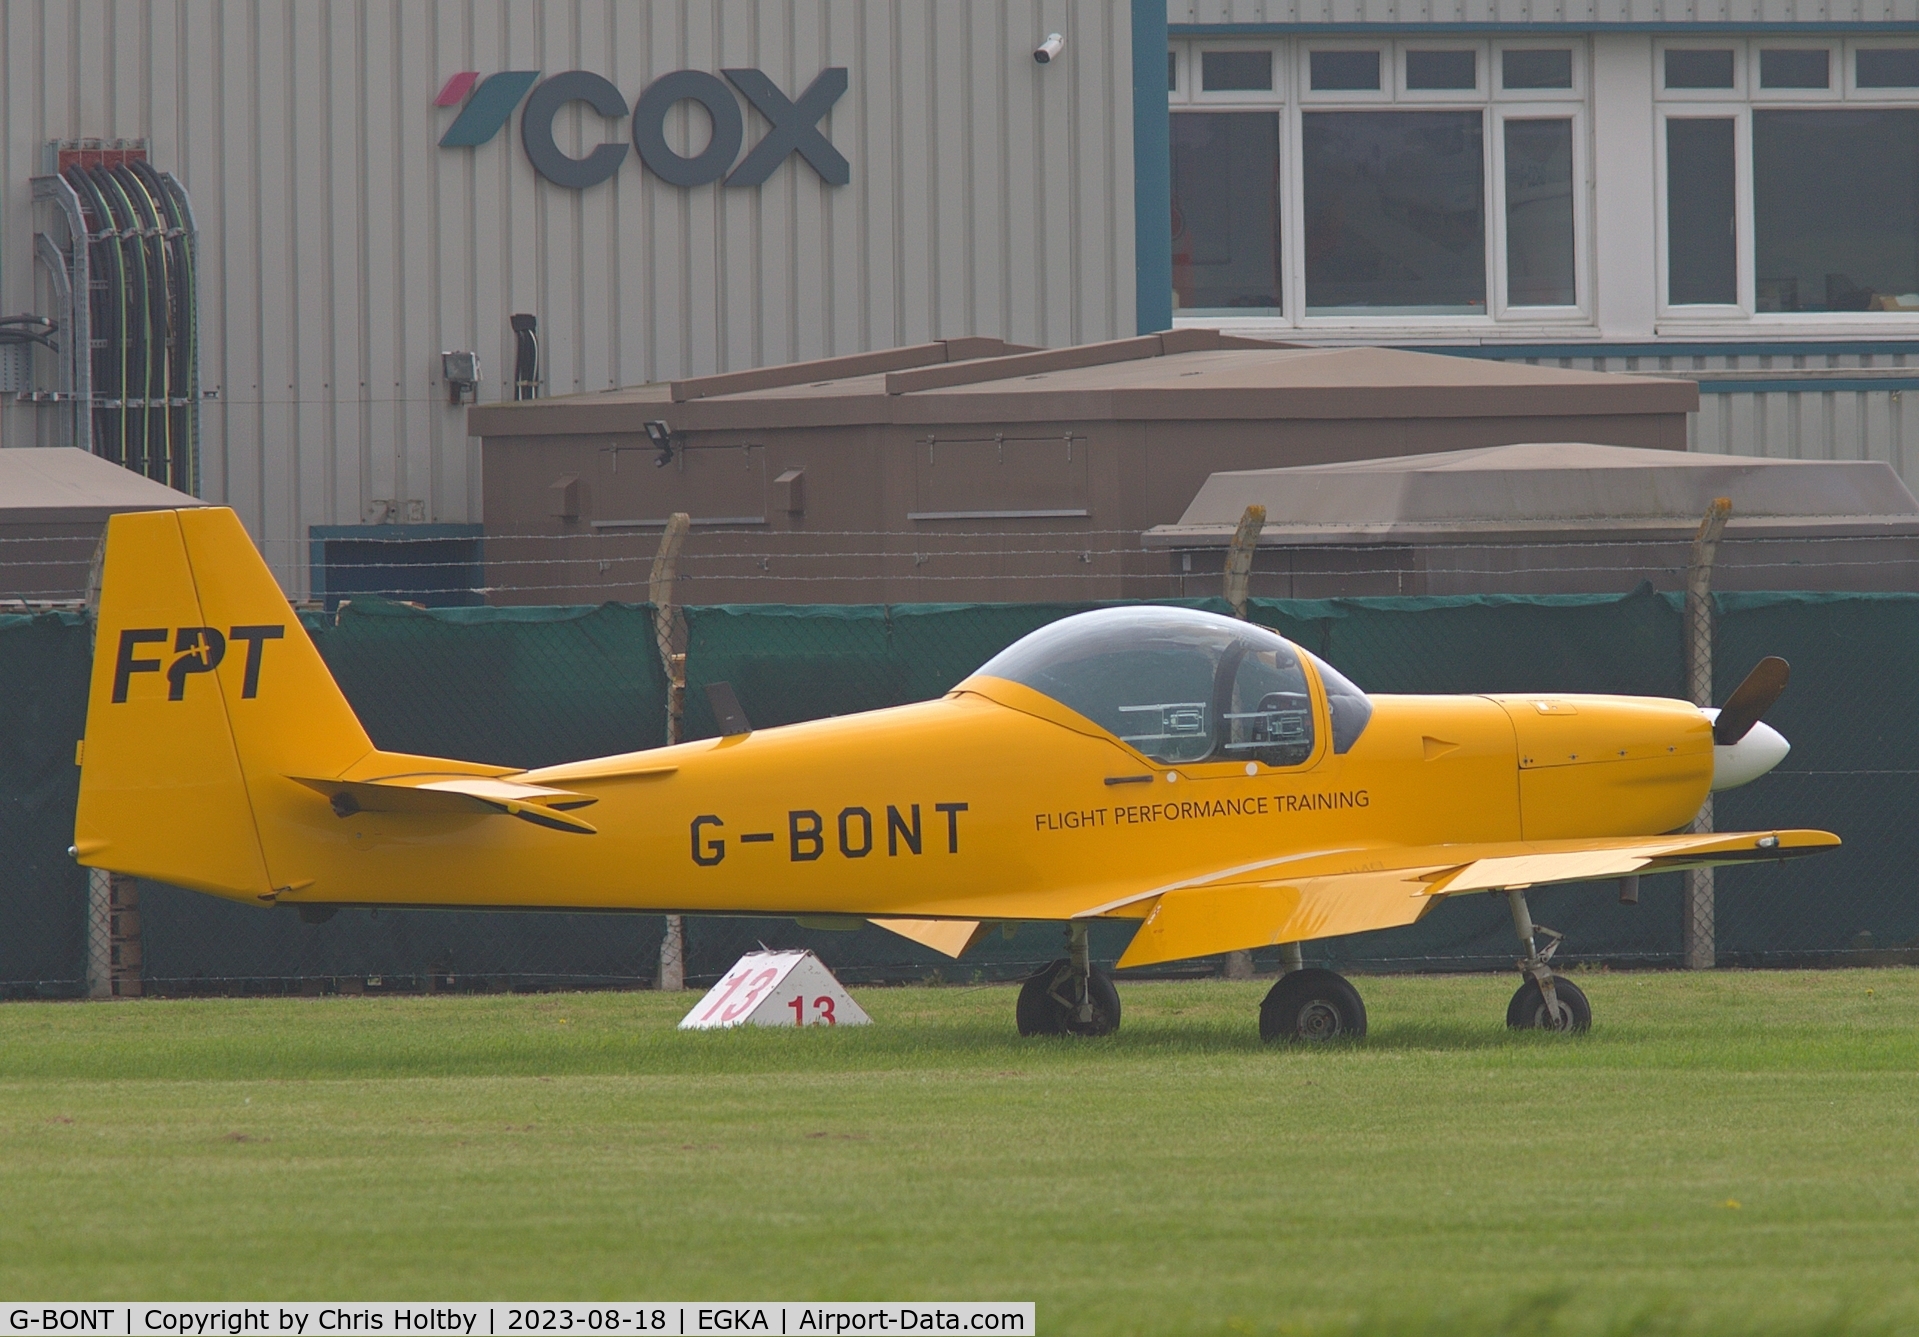 G-BONT, 1988 Slingsby T-67M Firefly Mk.II C/N 2054, In its usual parking spot at Shoreham Airport, E Sussex